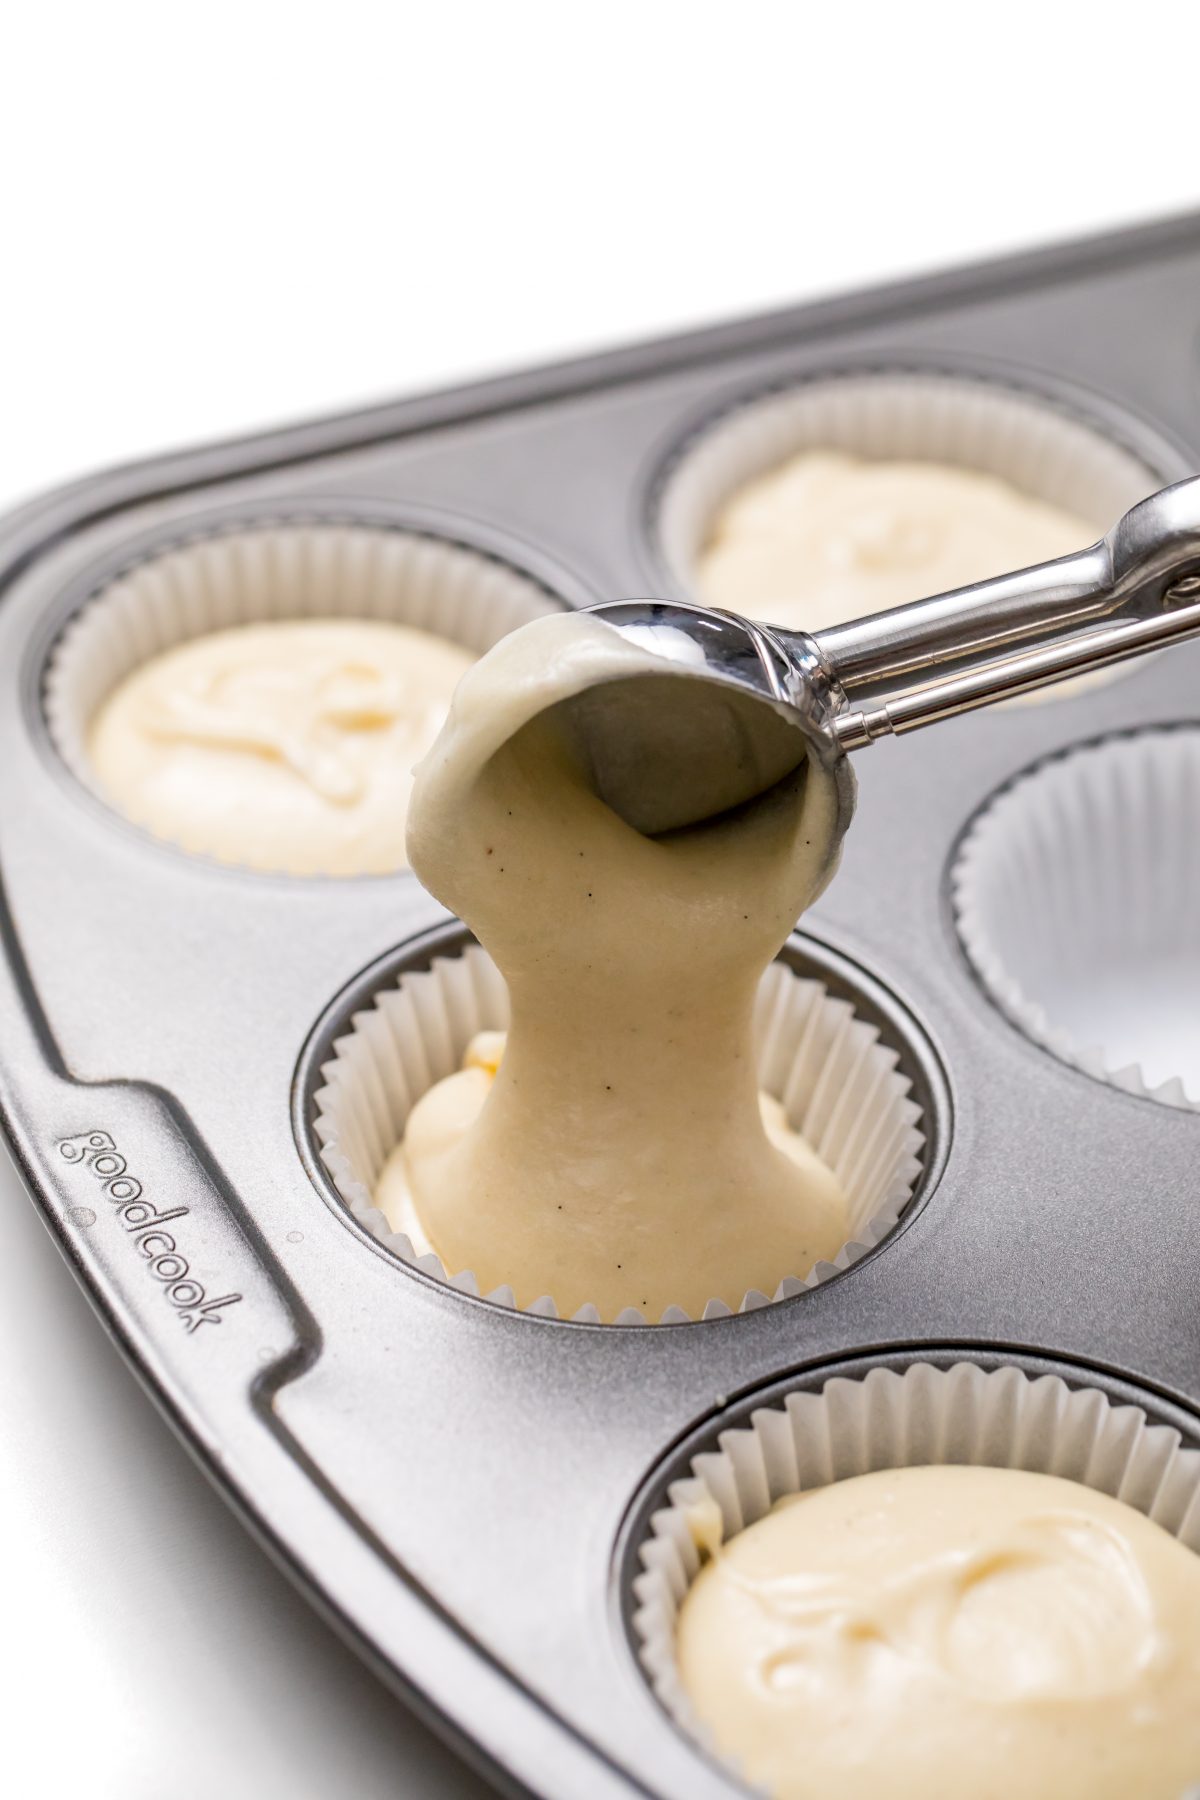 Scoop equal amounts of batter into lined cupcake pan to bake